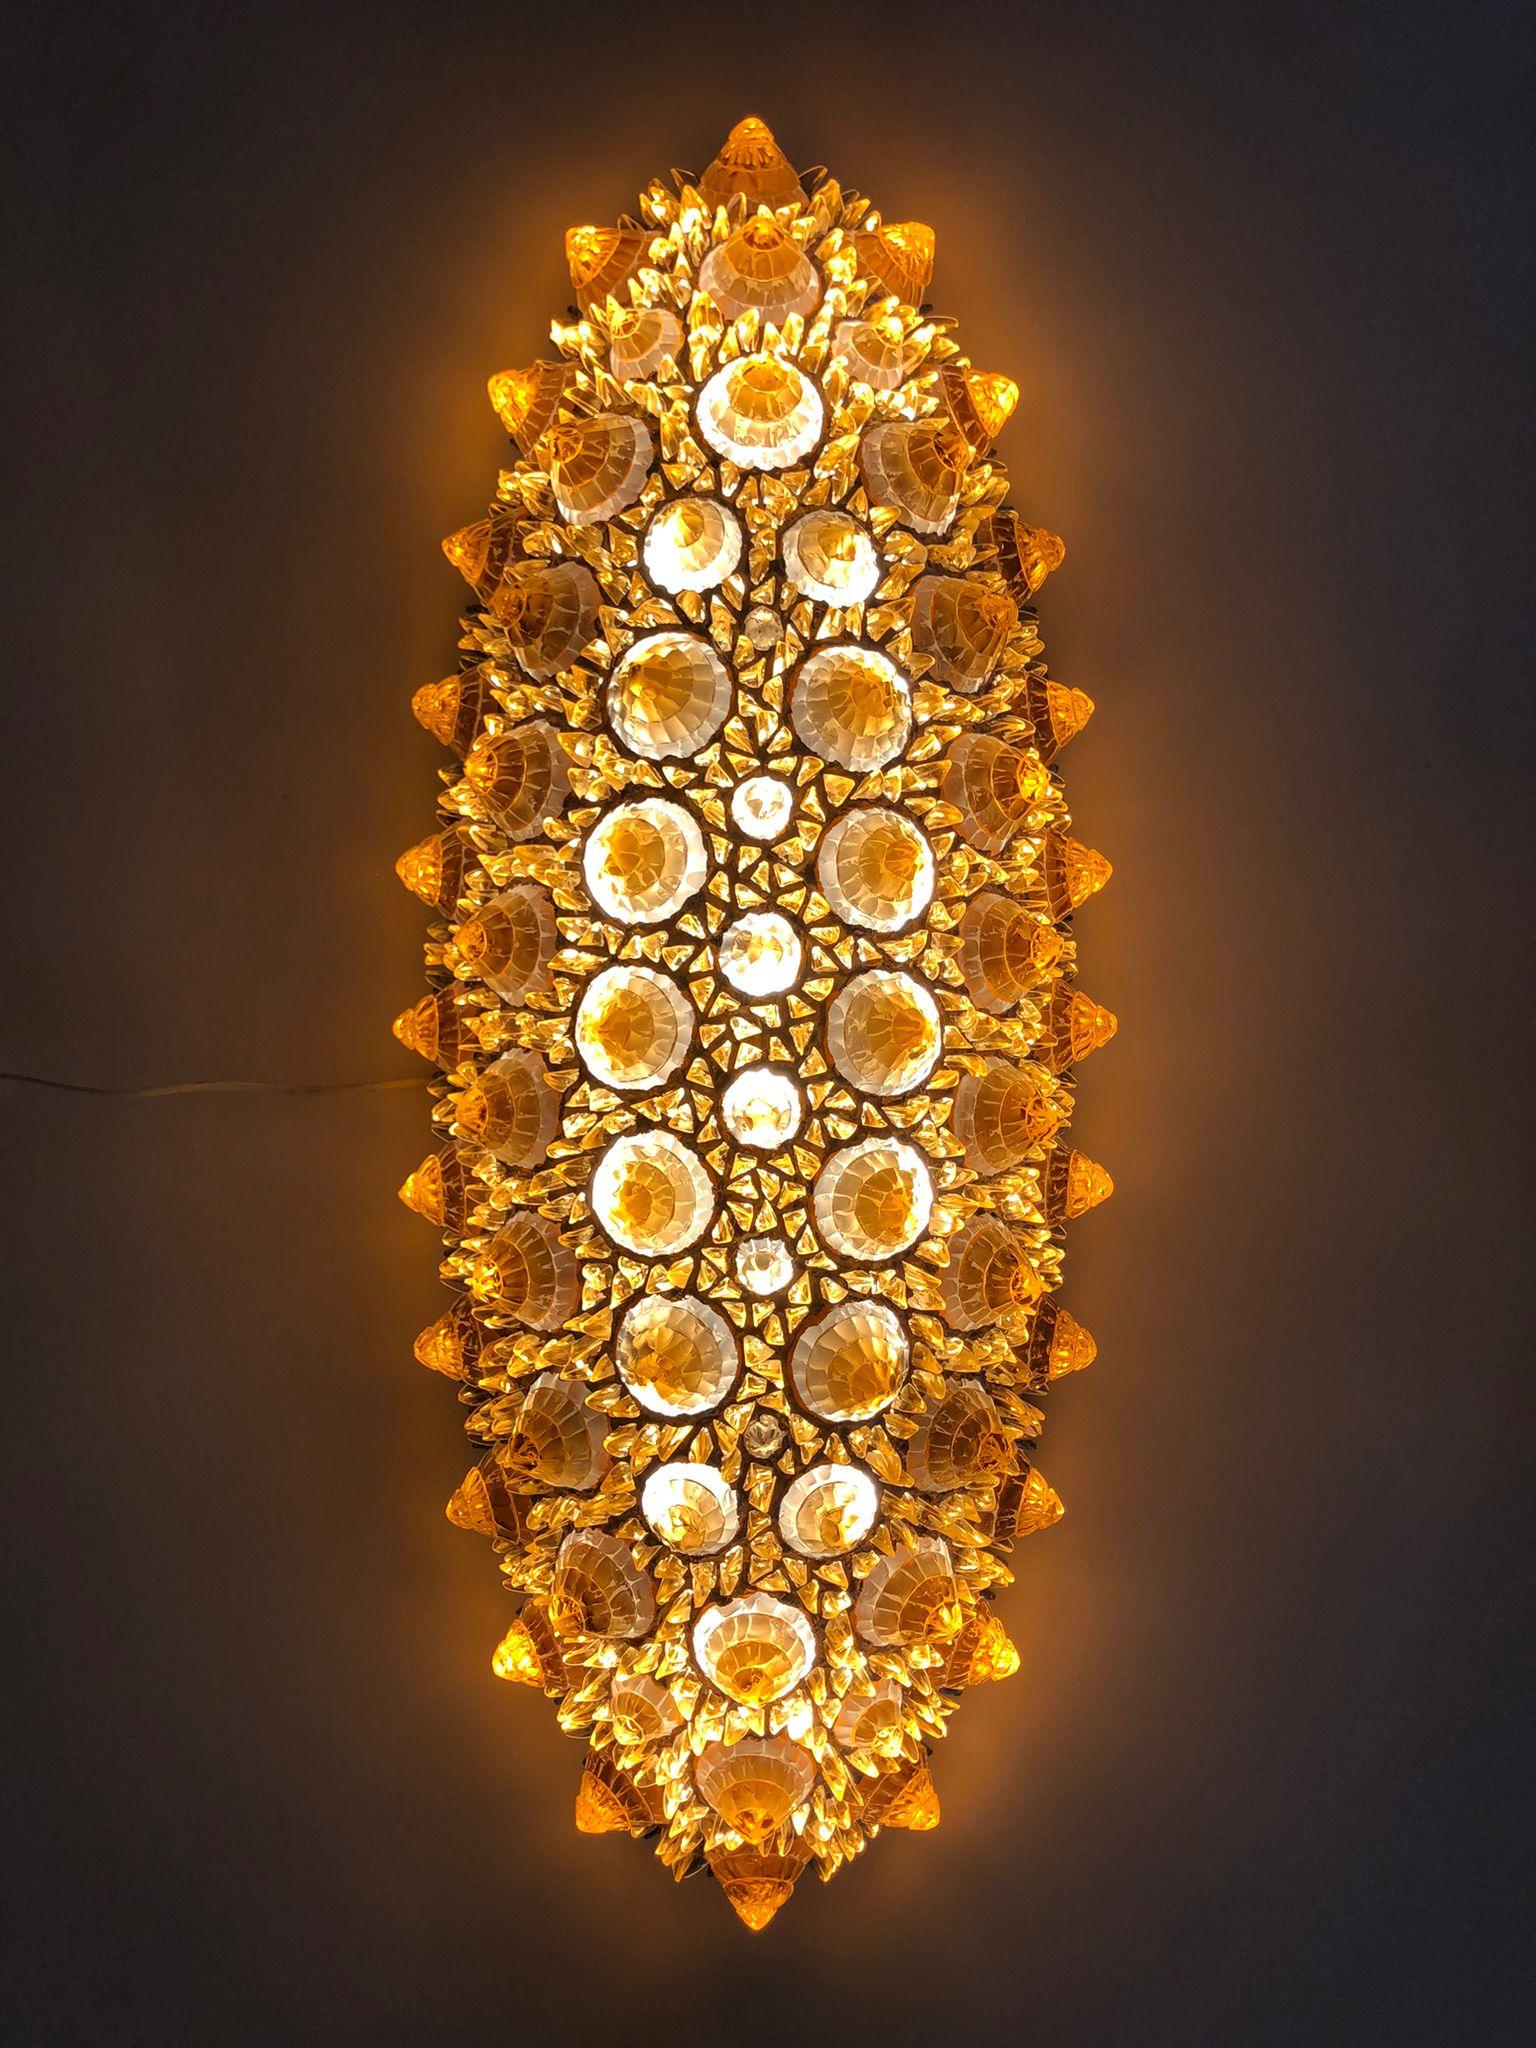 Bring the sun indoors! A jewel-like Italian oval pendant or flush mount chandelier, Work of Art sculpture, entirely handcrafted, the sophisticated organic decoration is composed of hand-cut rock glass diamond elements of different sizes set in a